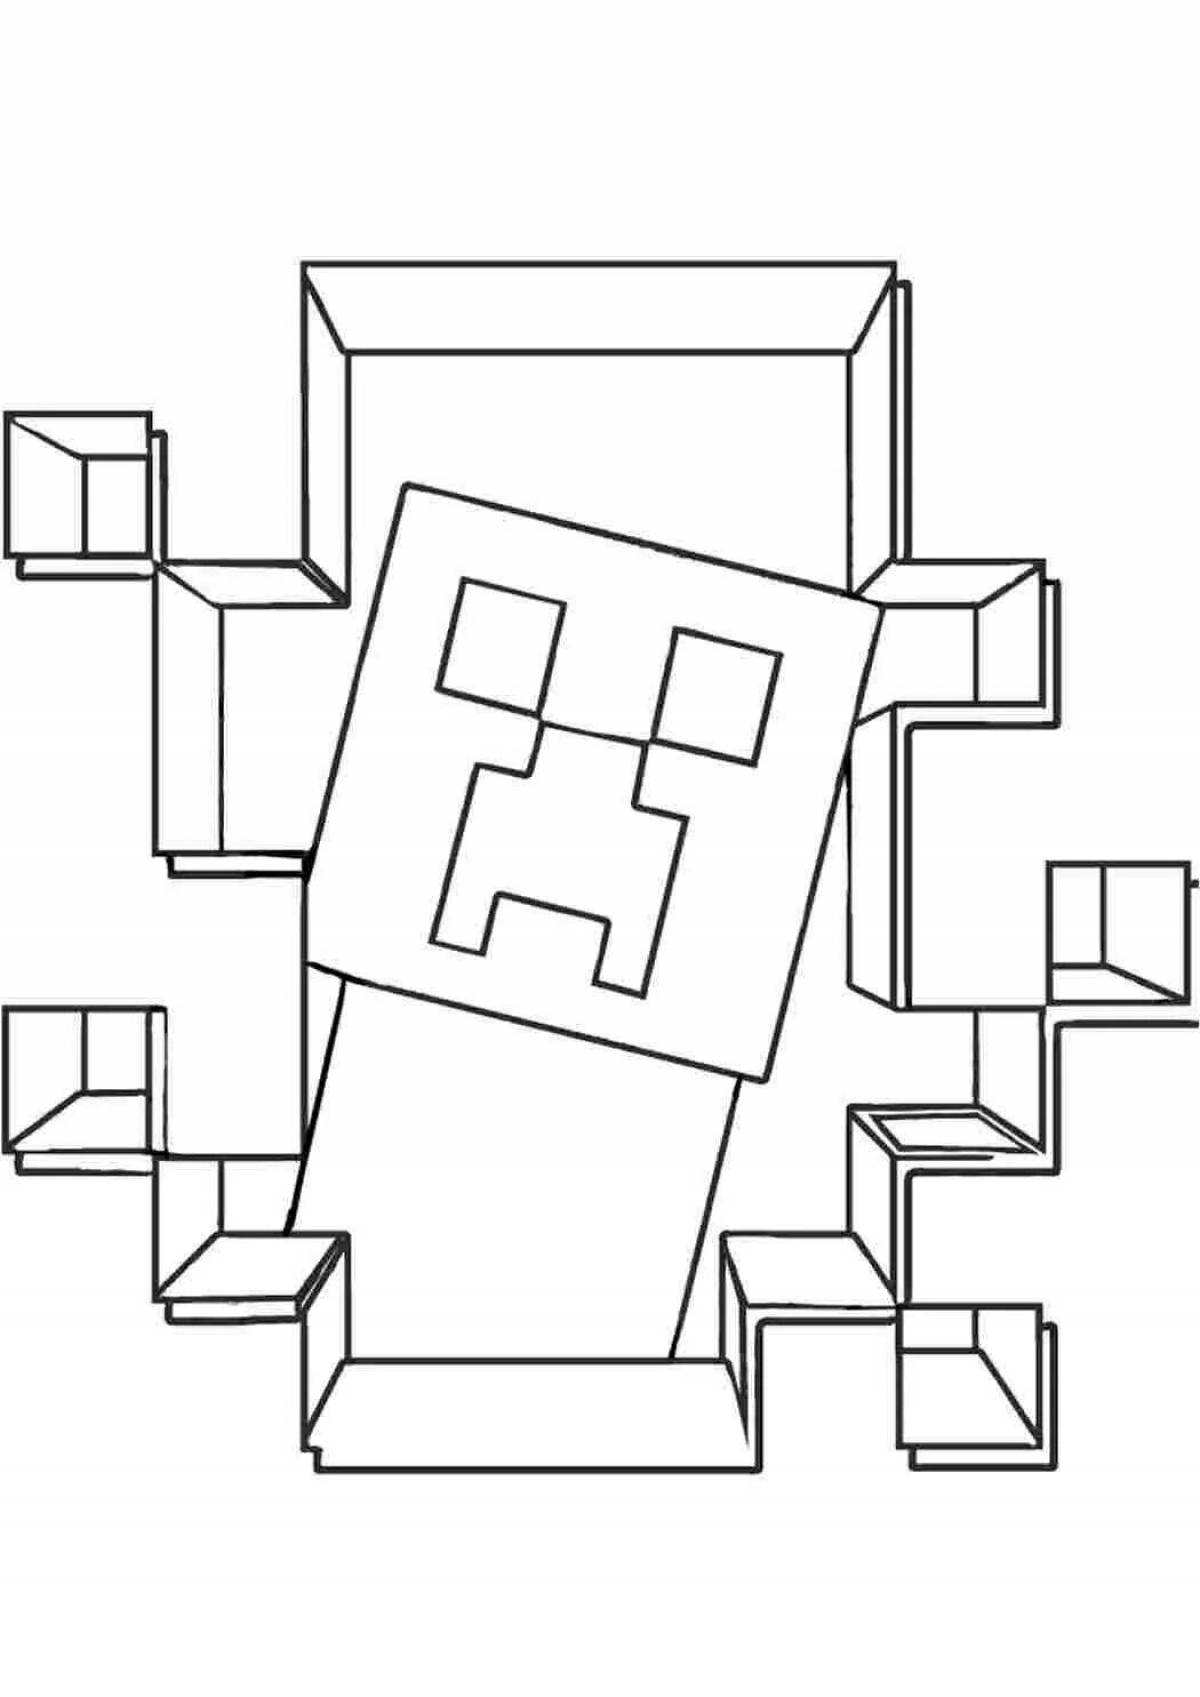 Exciting minecraft stickers coloring design